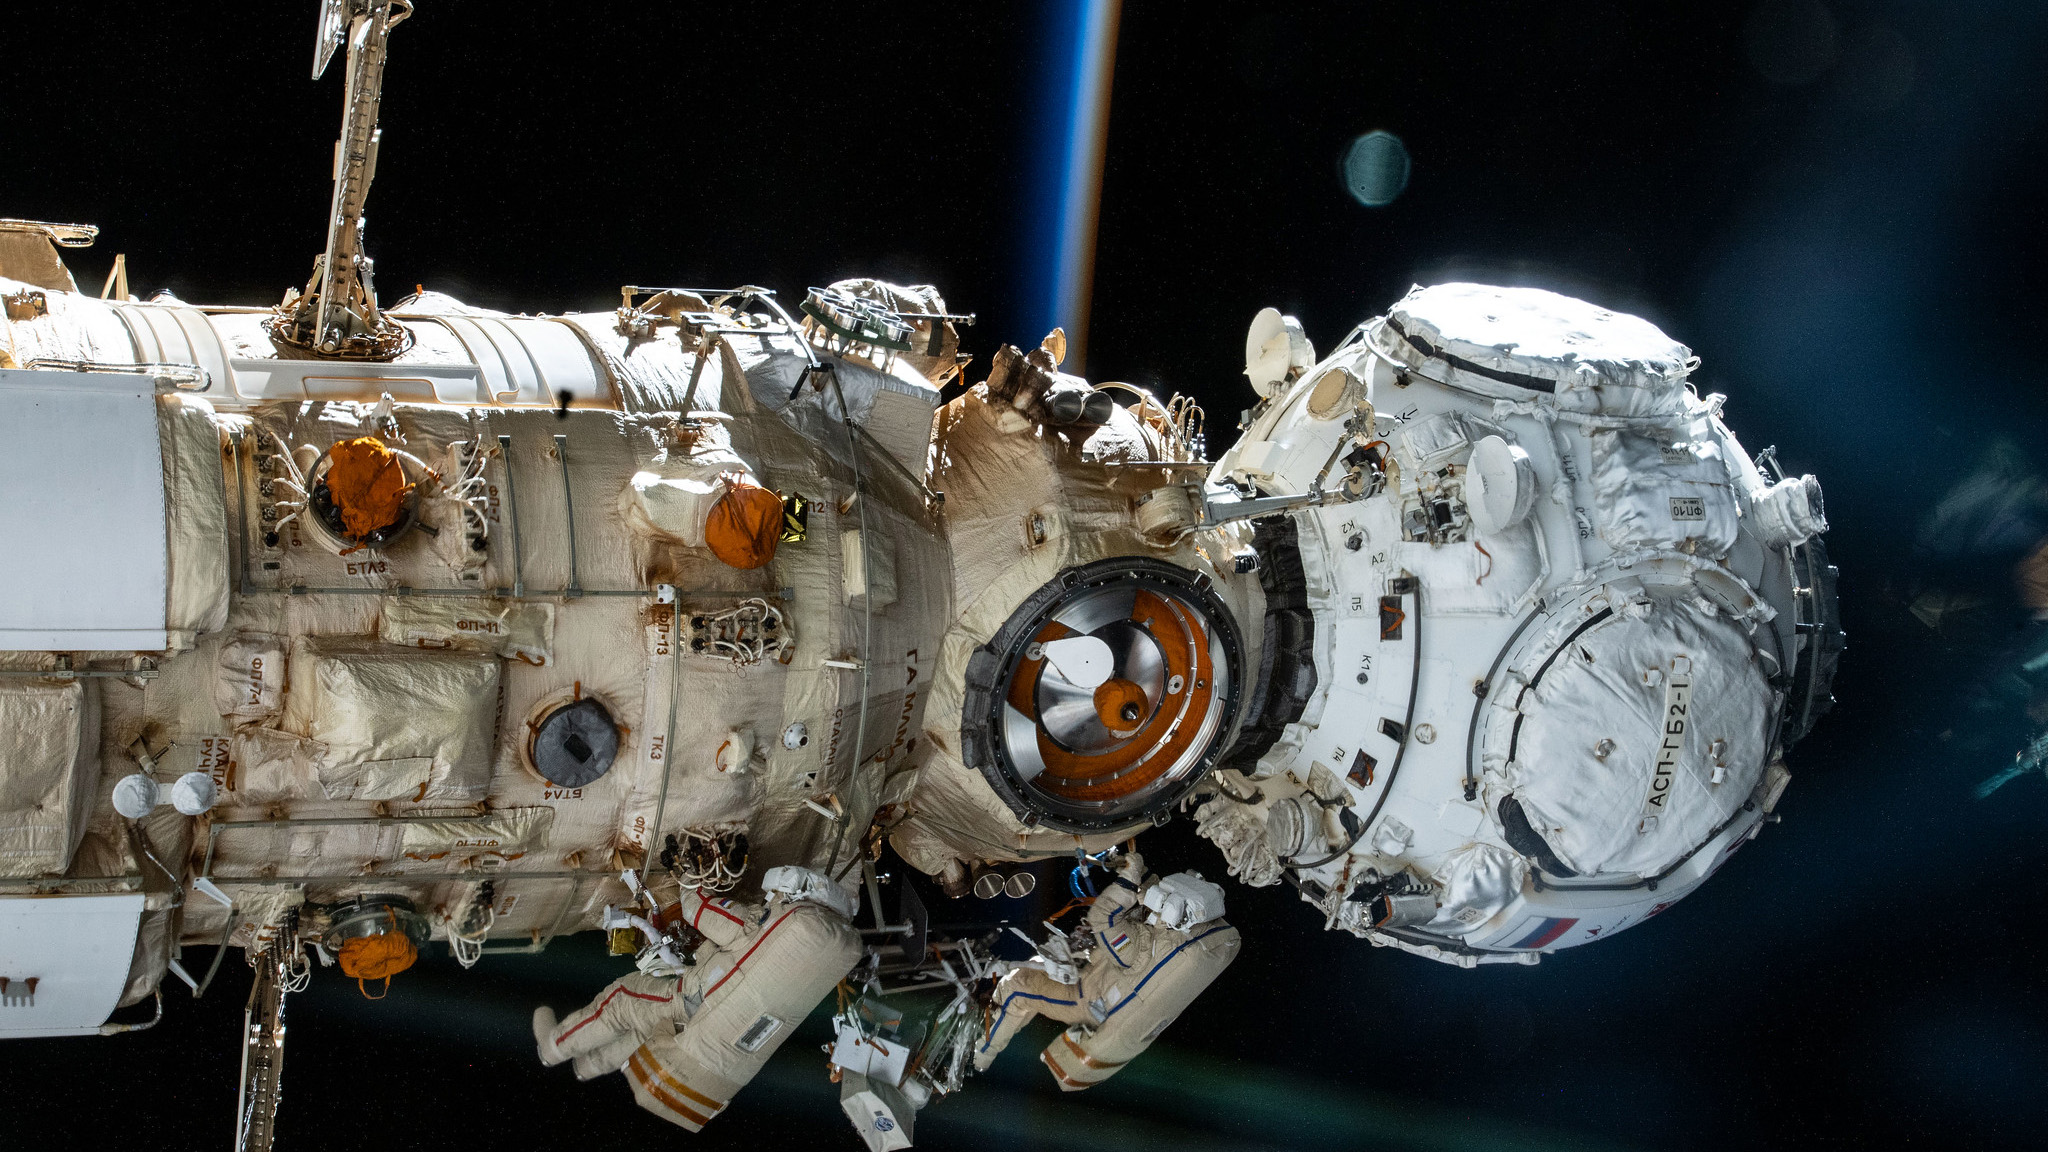 Roscosmos cosmonauts (from bottom left) Anton Shkaplerov and Pyotr Dubrov work outside the Nauka multipurpose laboratory module on the International Space Station during a spacewalk in January 2022.